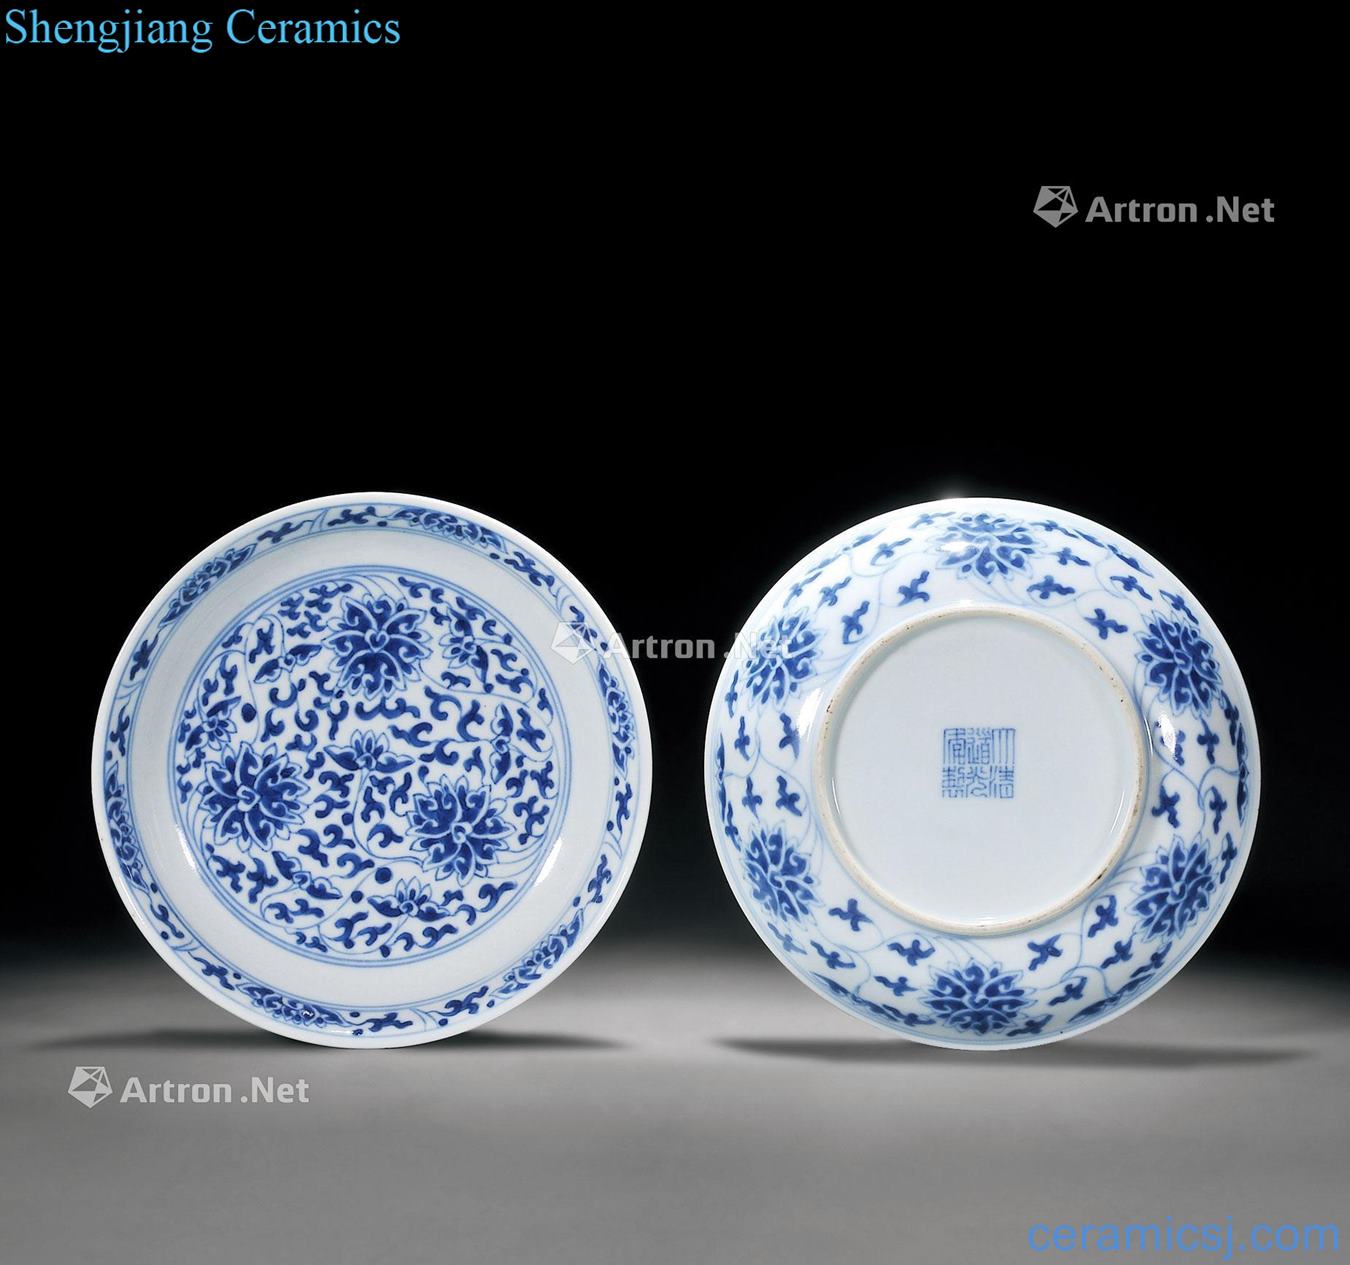 Qing daoguang Blue and white tie up lotus flower tray (a)